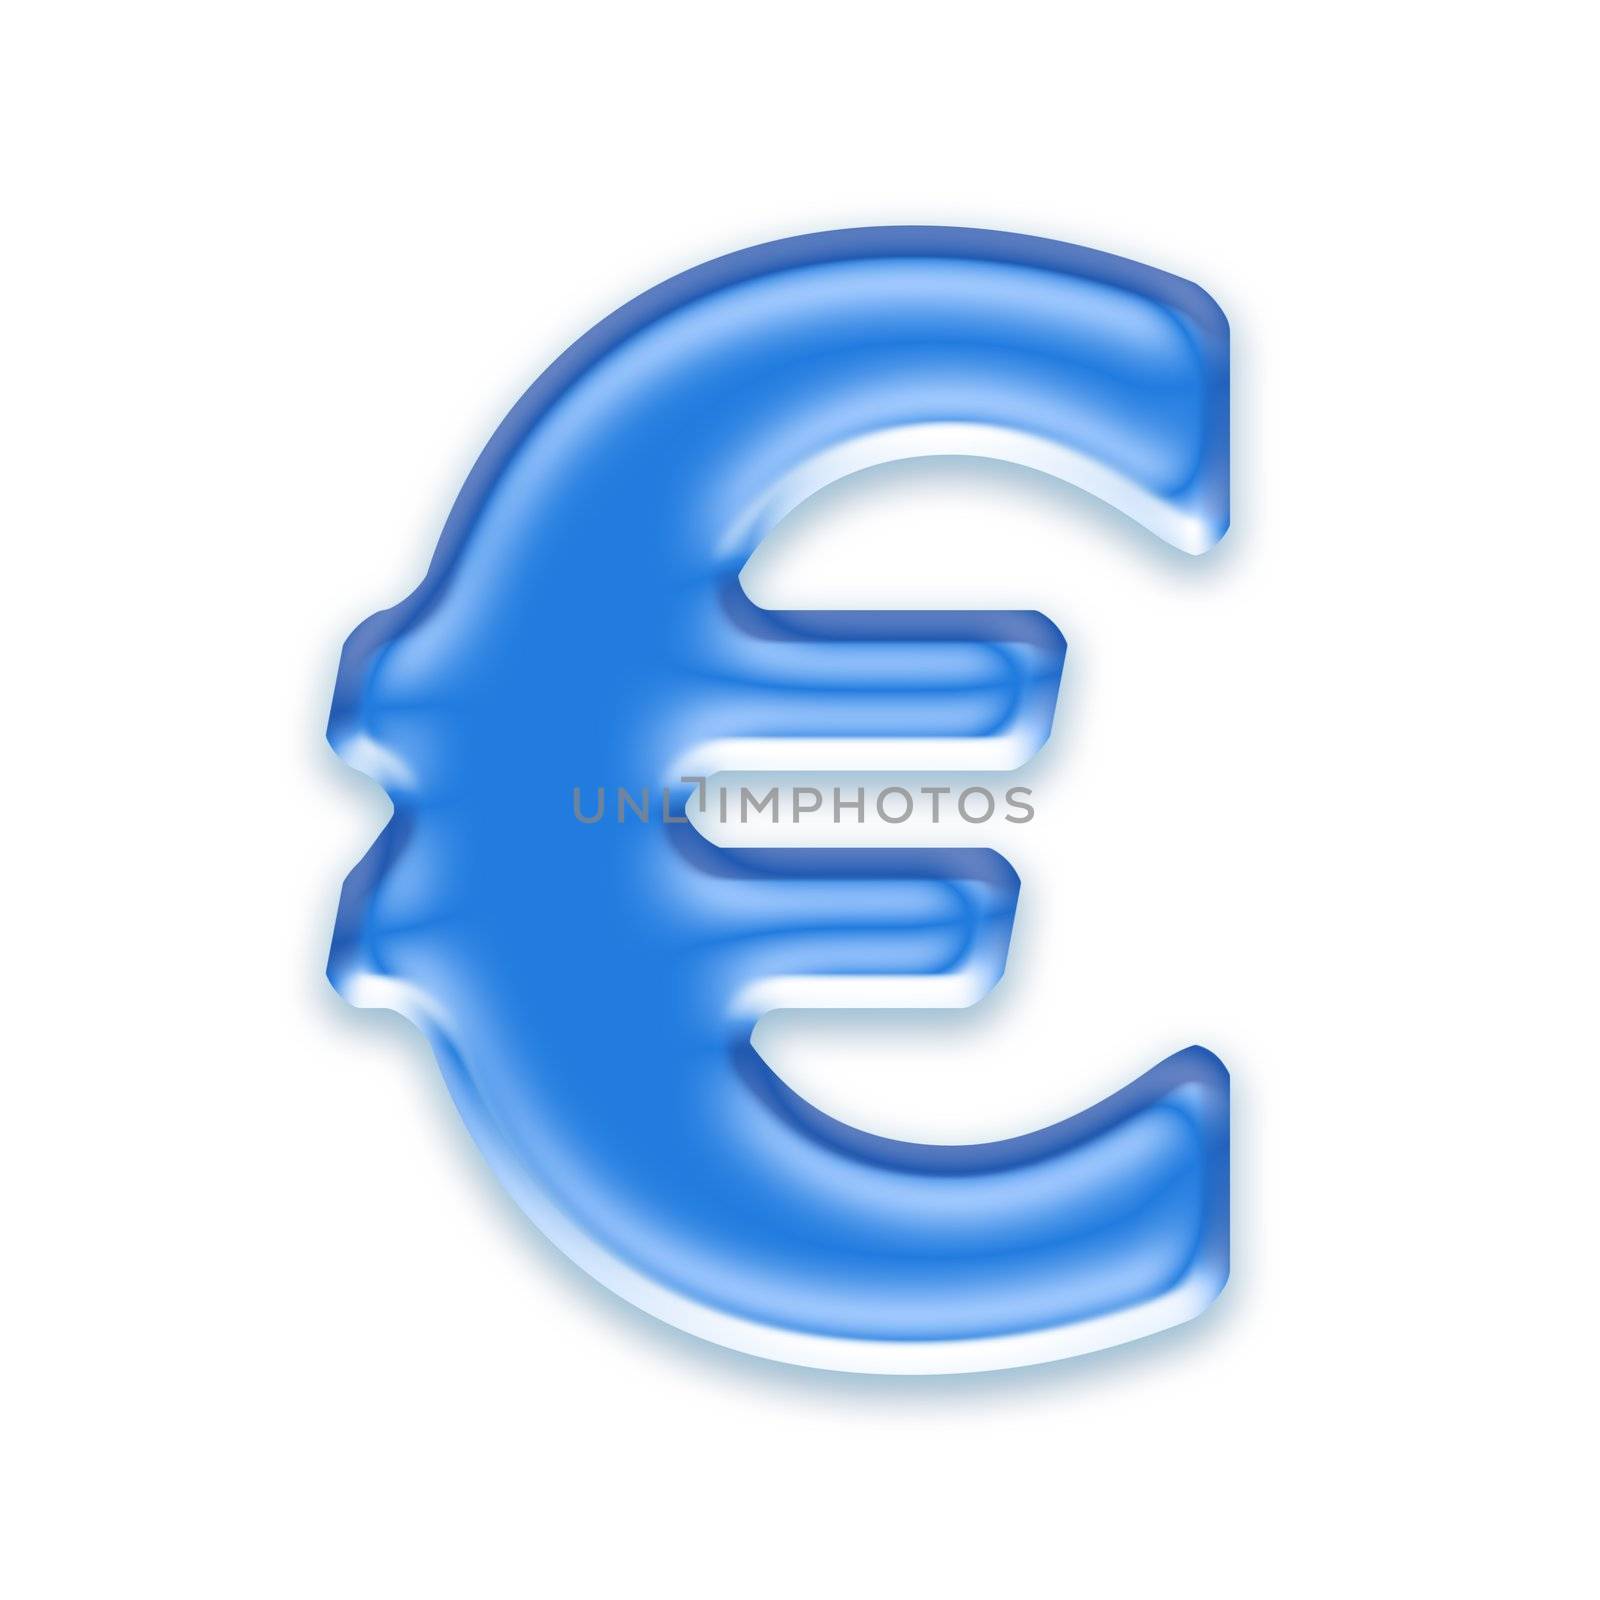 Aqua currency sign isolated on a white background - Euro by chrisroll